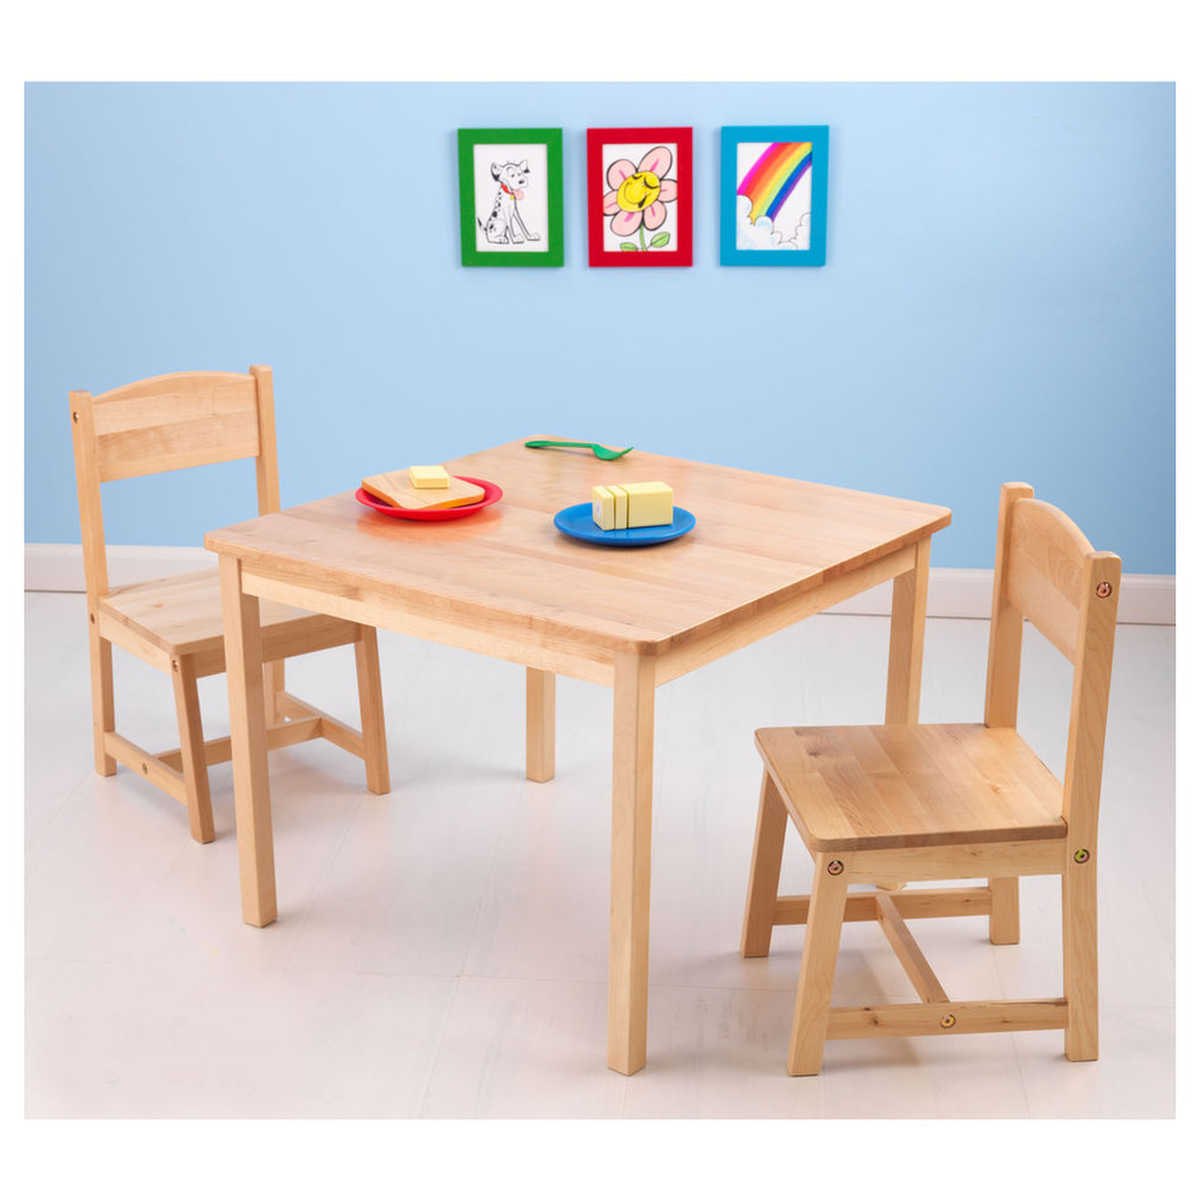 Fisher Price Table And Chair Set - Decor Ideas